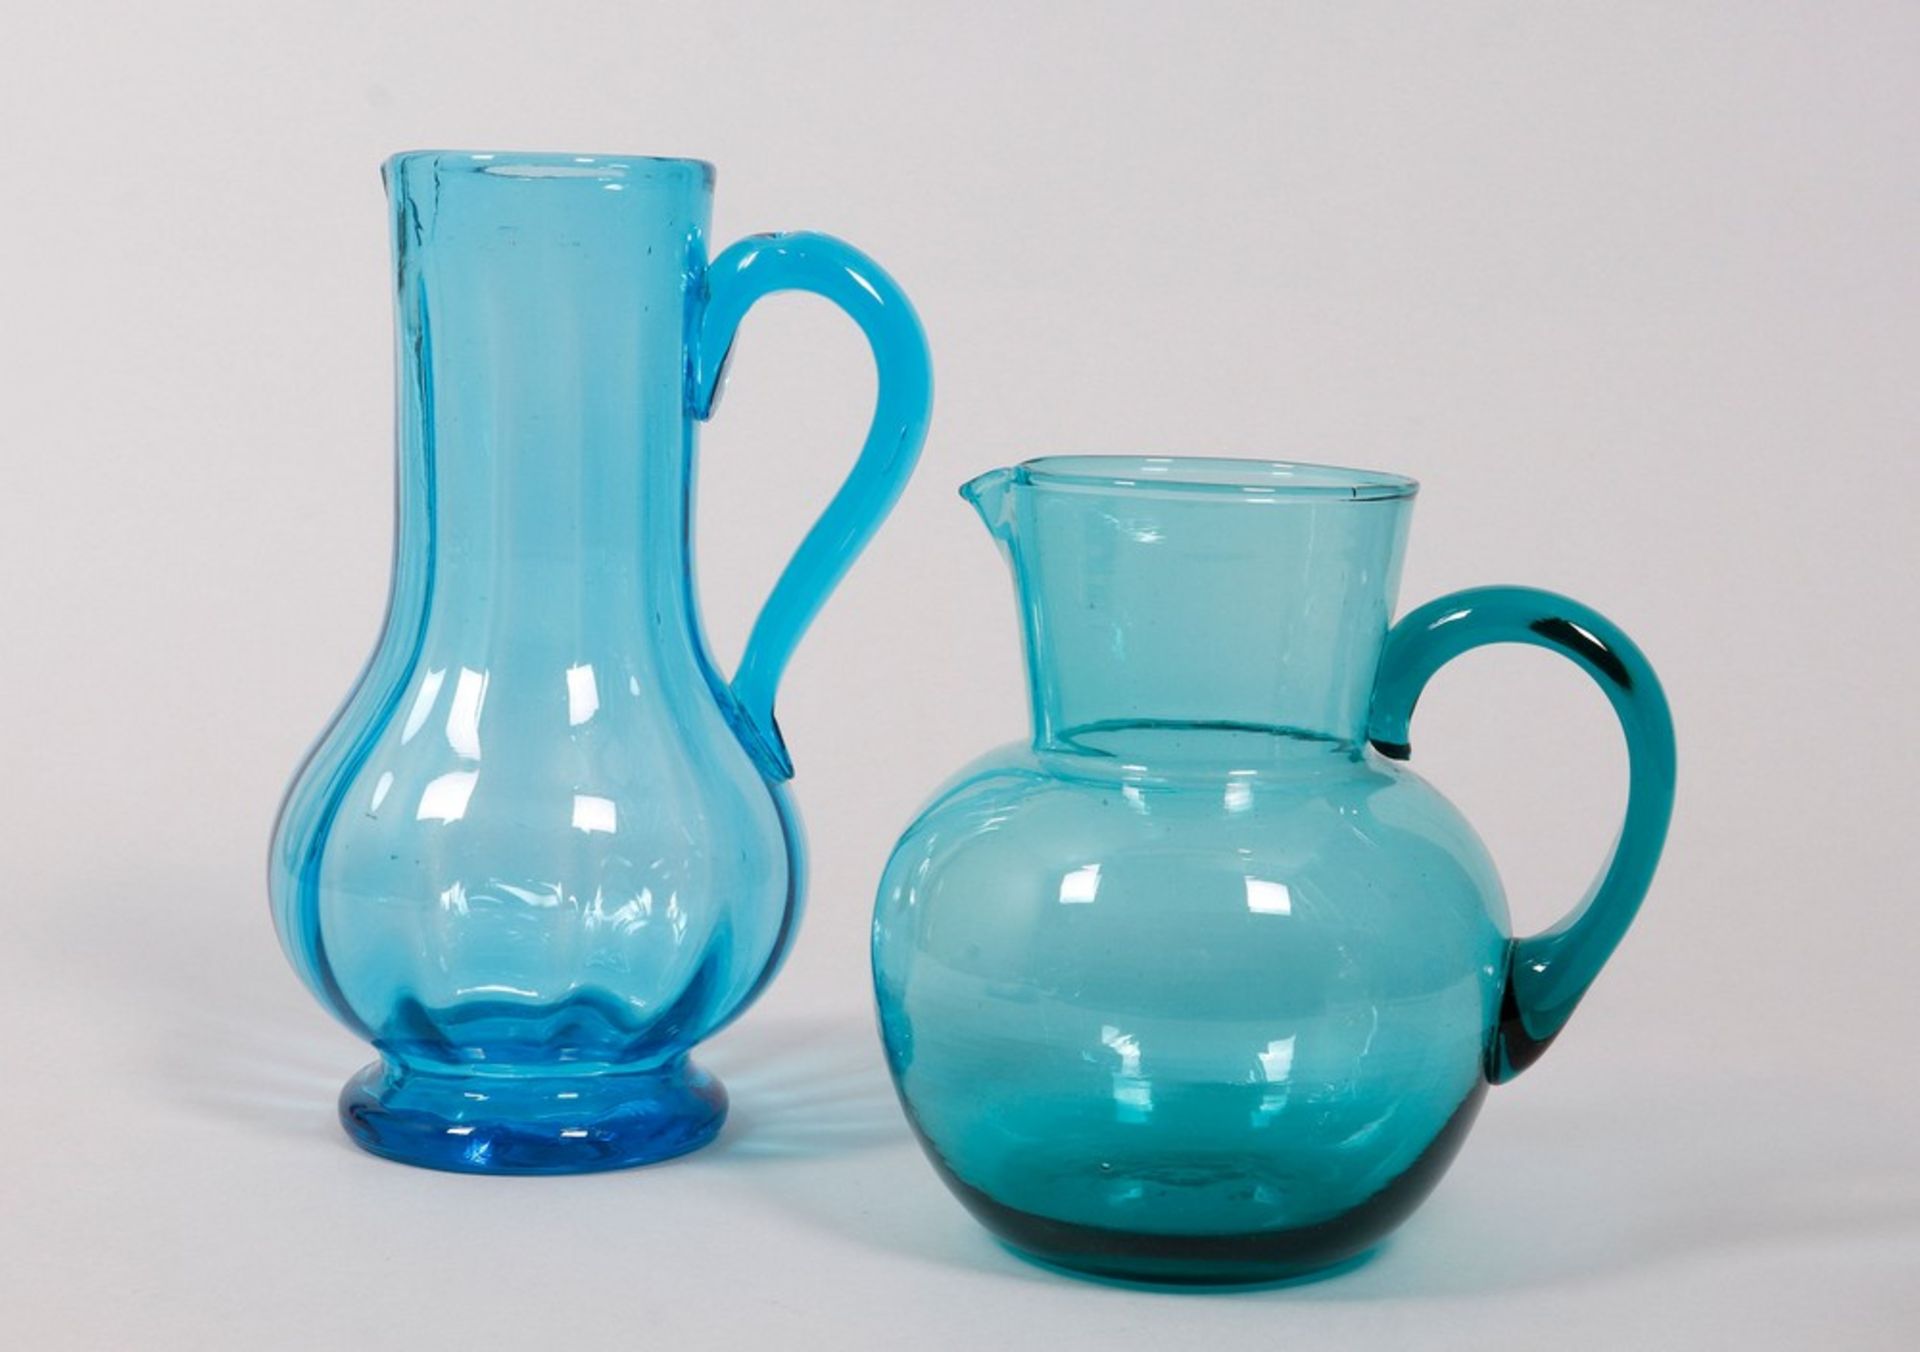 Mixed lot of glass jugs in blue, 3 pieces, German/Bohemian, 19th/20th C. - Image 2 of 6